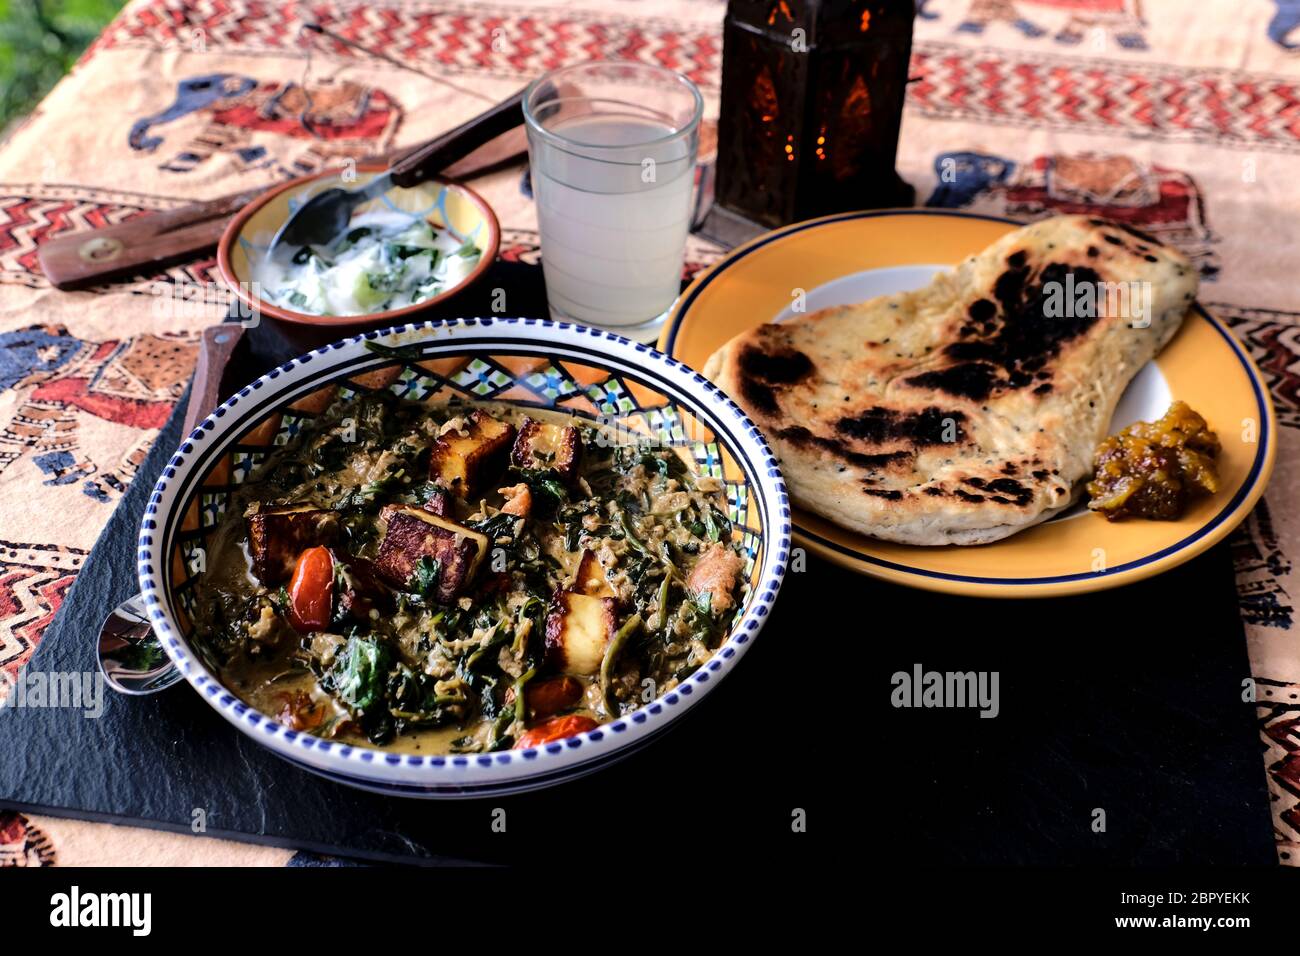 A Dish of Homemade Saag Paneer with Naan Stock Photo